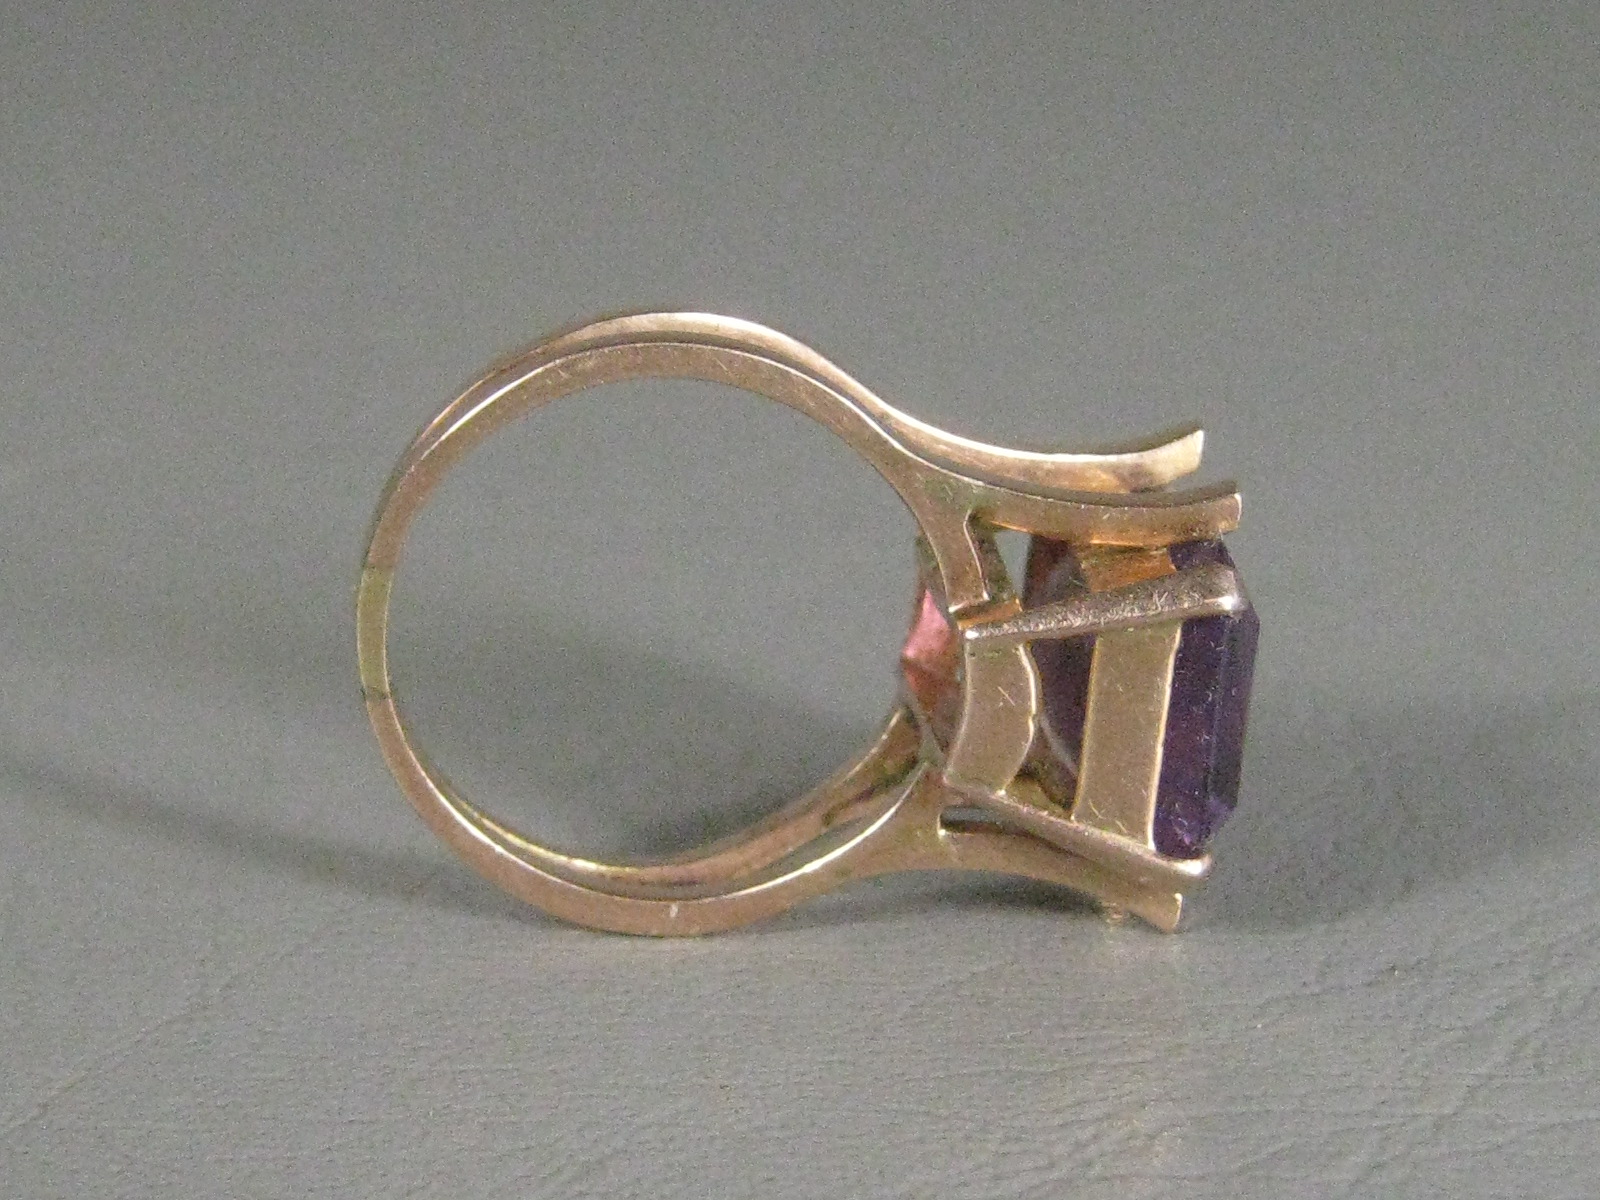 Vintage Antique Amethyst Ring Size 8.25 Estate Jewelry Rose Gold? No Reserve! 9